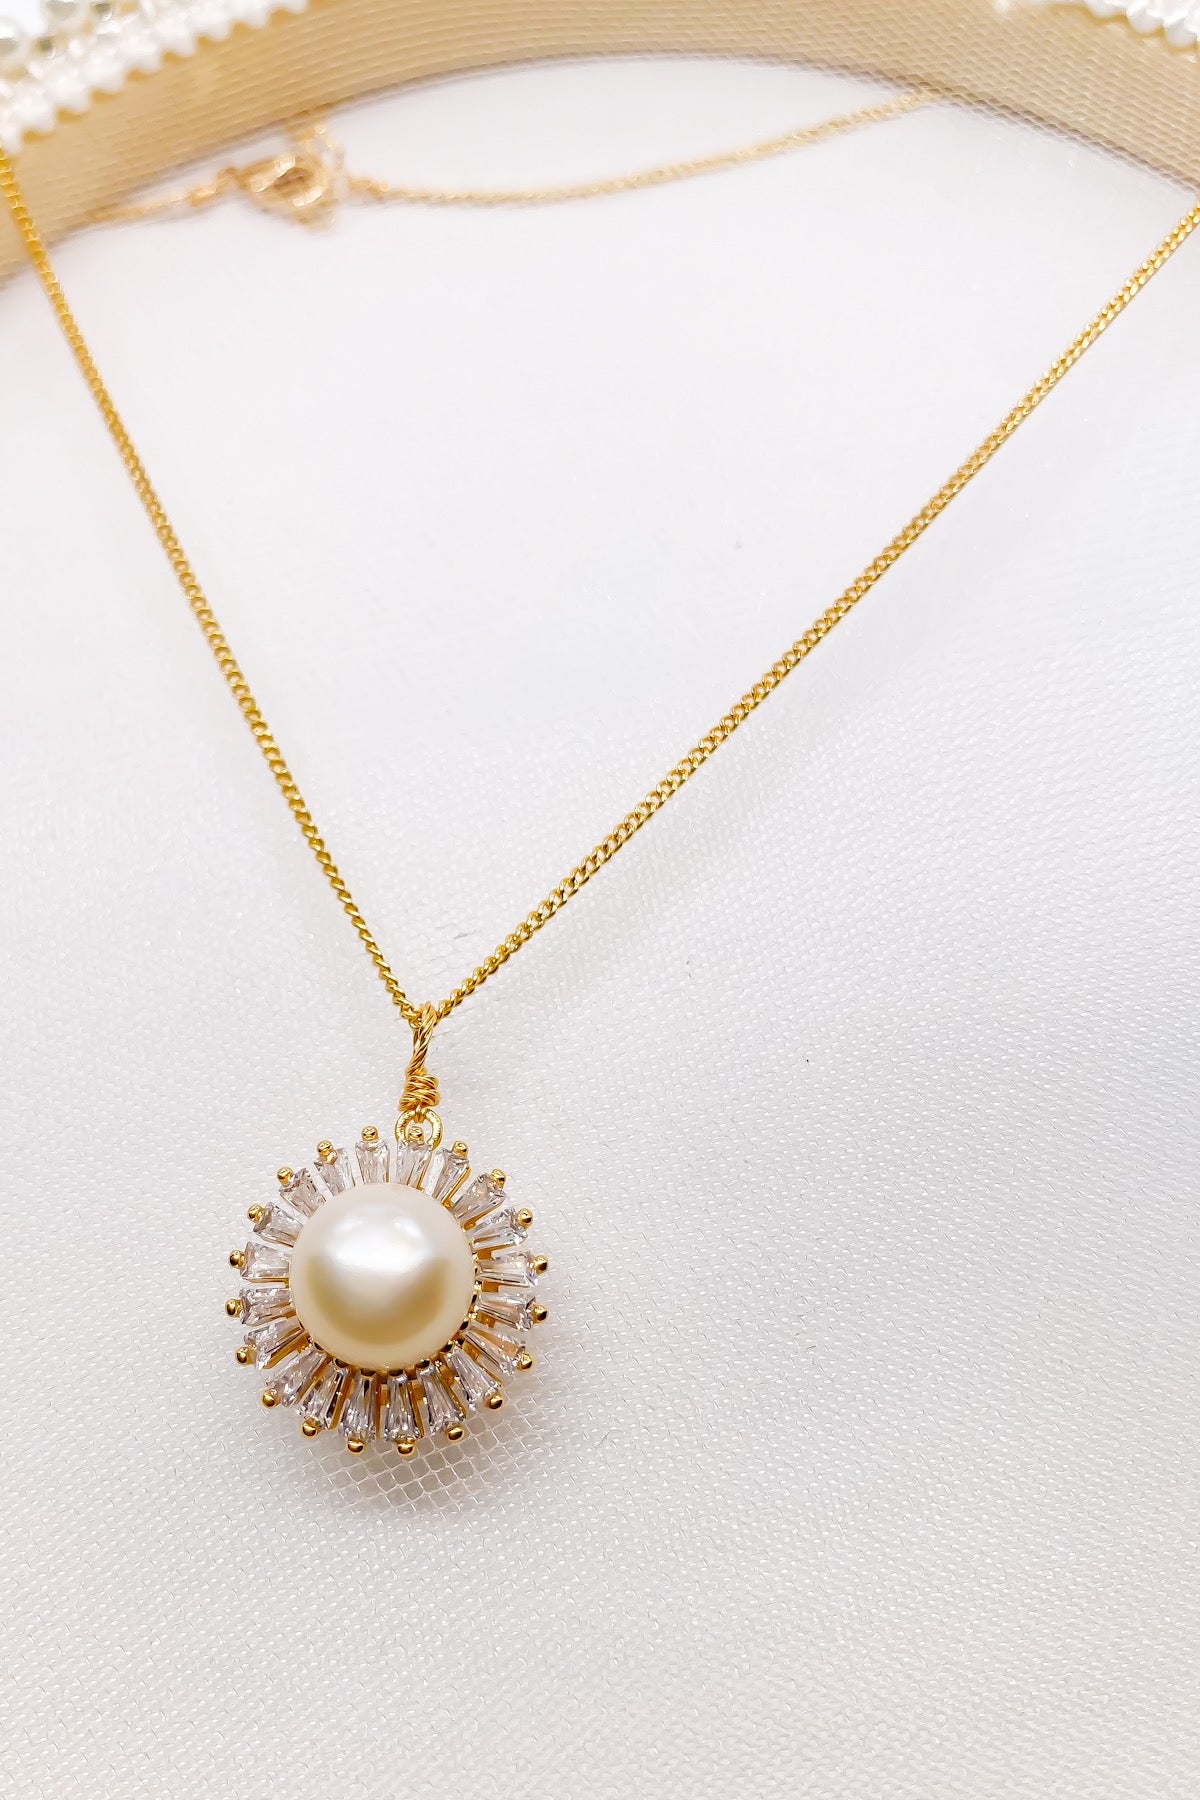 SKYE San Francisco Shop Chic Modern Elegant Classy Women Jewelry French Parisian Minimalist Camille Gold Pearl Crystal Baguette Pendant Necklace 5